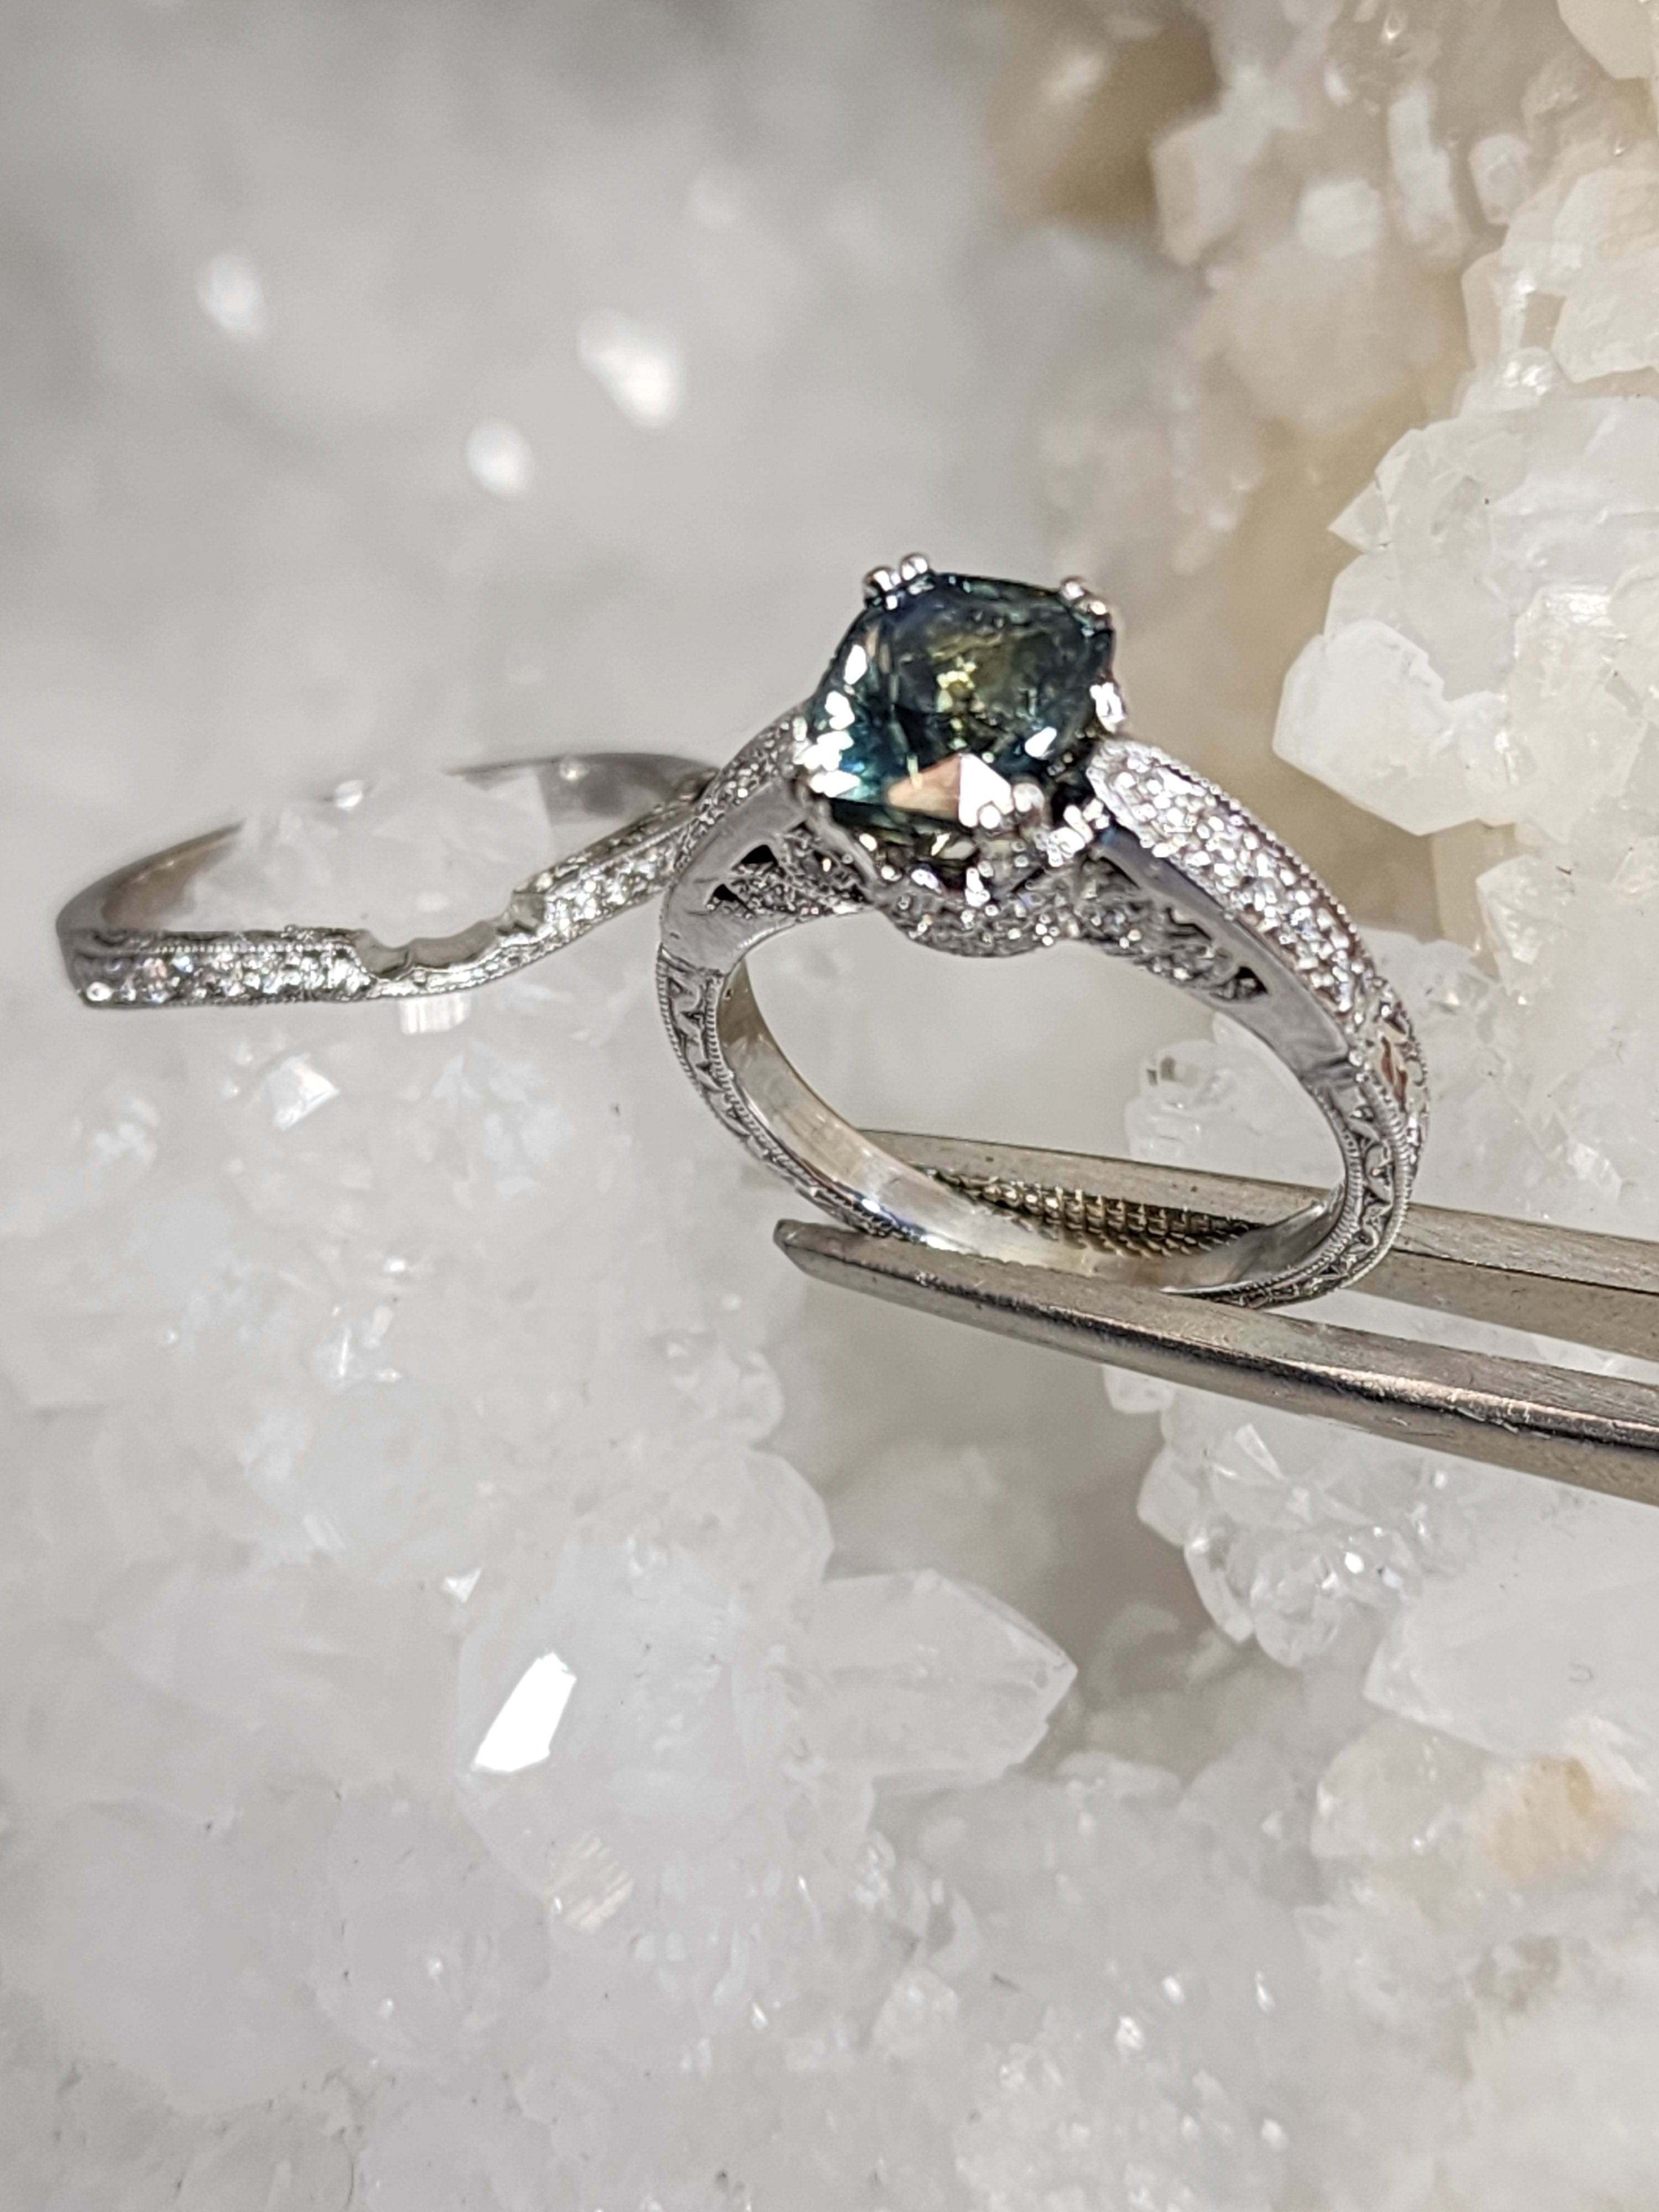 Engagement and Wedding Ring Set - 2.3 CT Teal Madagascar Sapphire set in 14K White Gold with Matching Contoured Band with accent diamonds